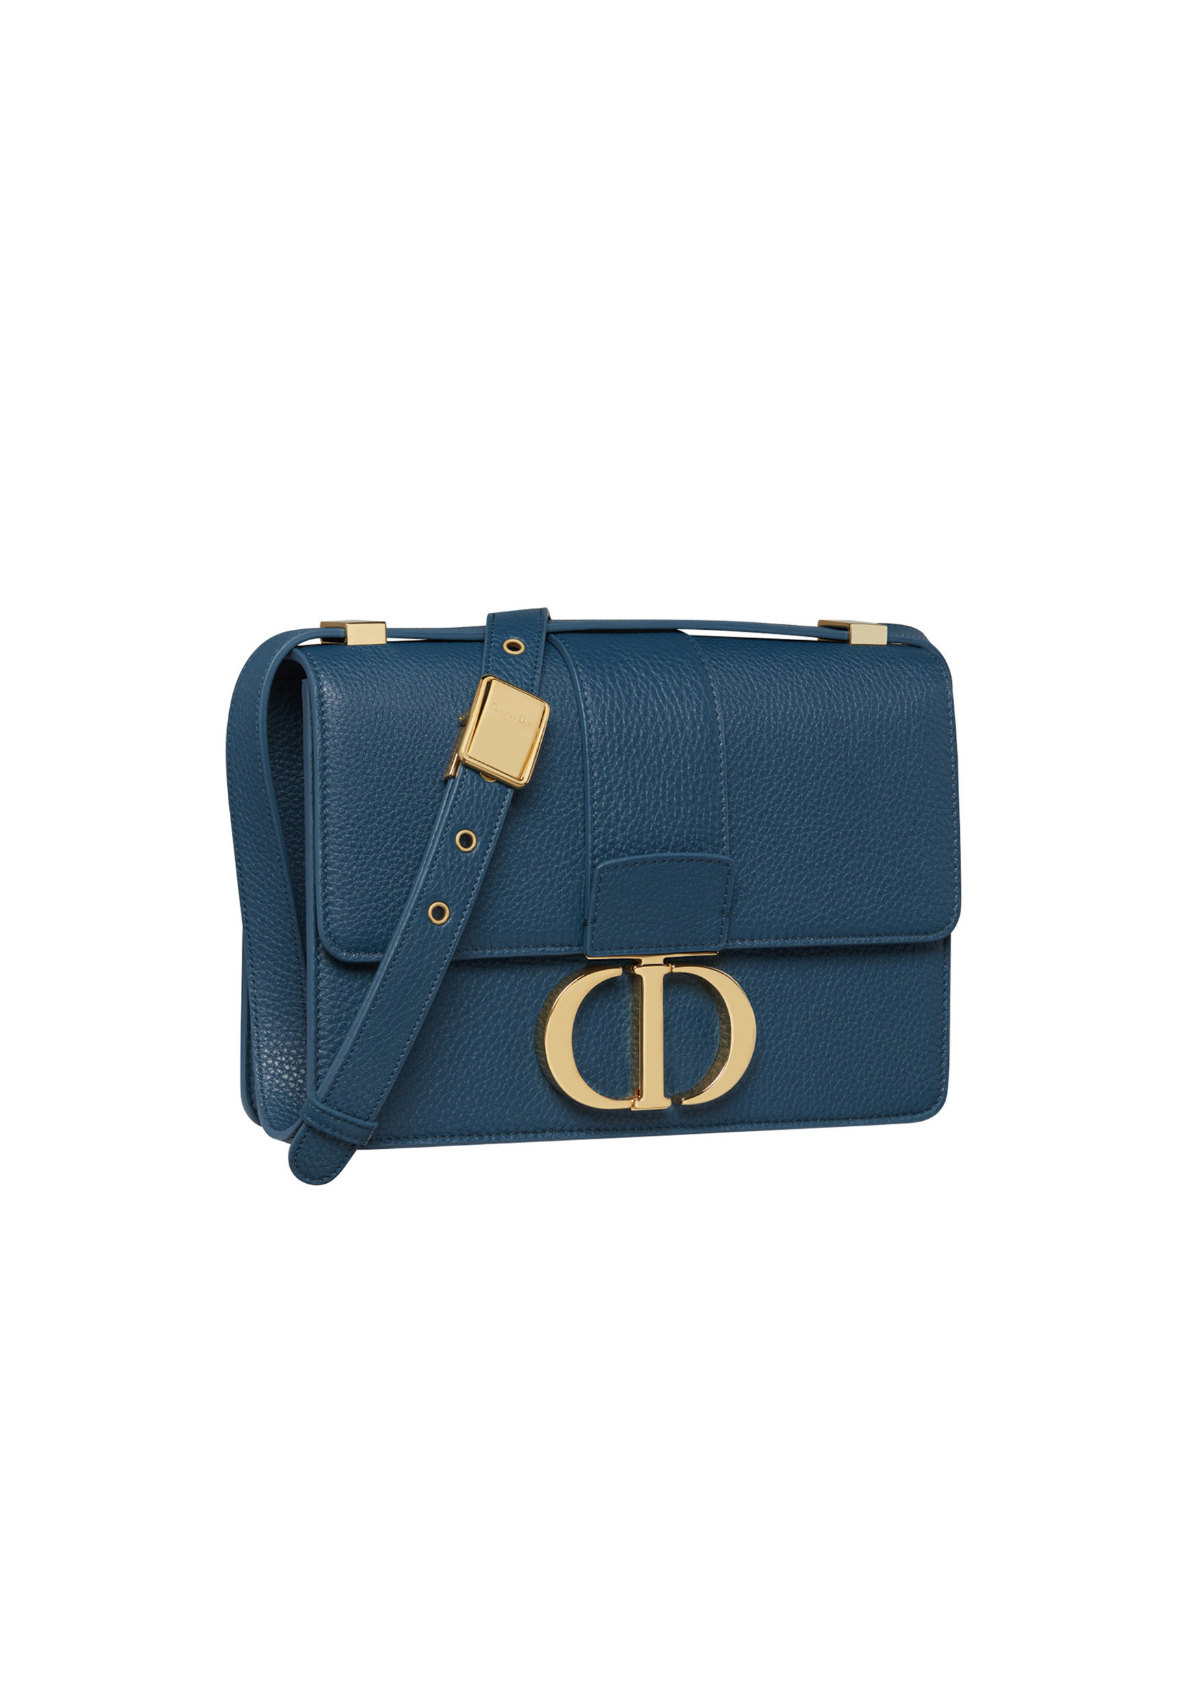 Dior Women Fall-Winter 2021-22 Collection - Bags